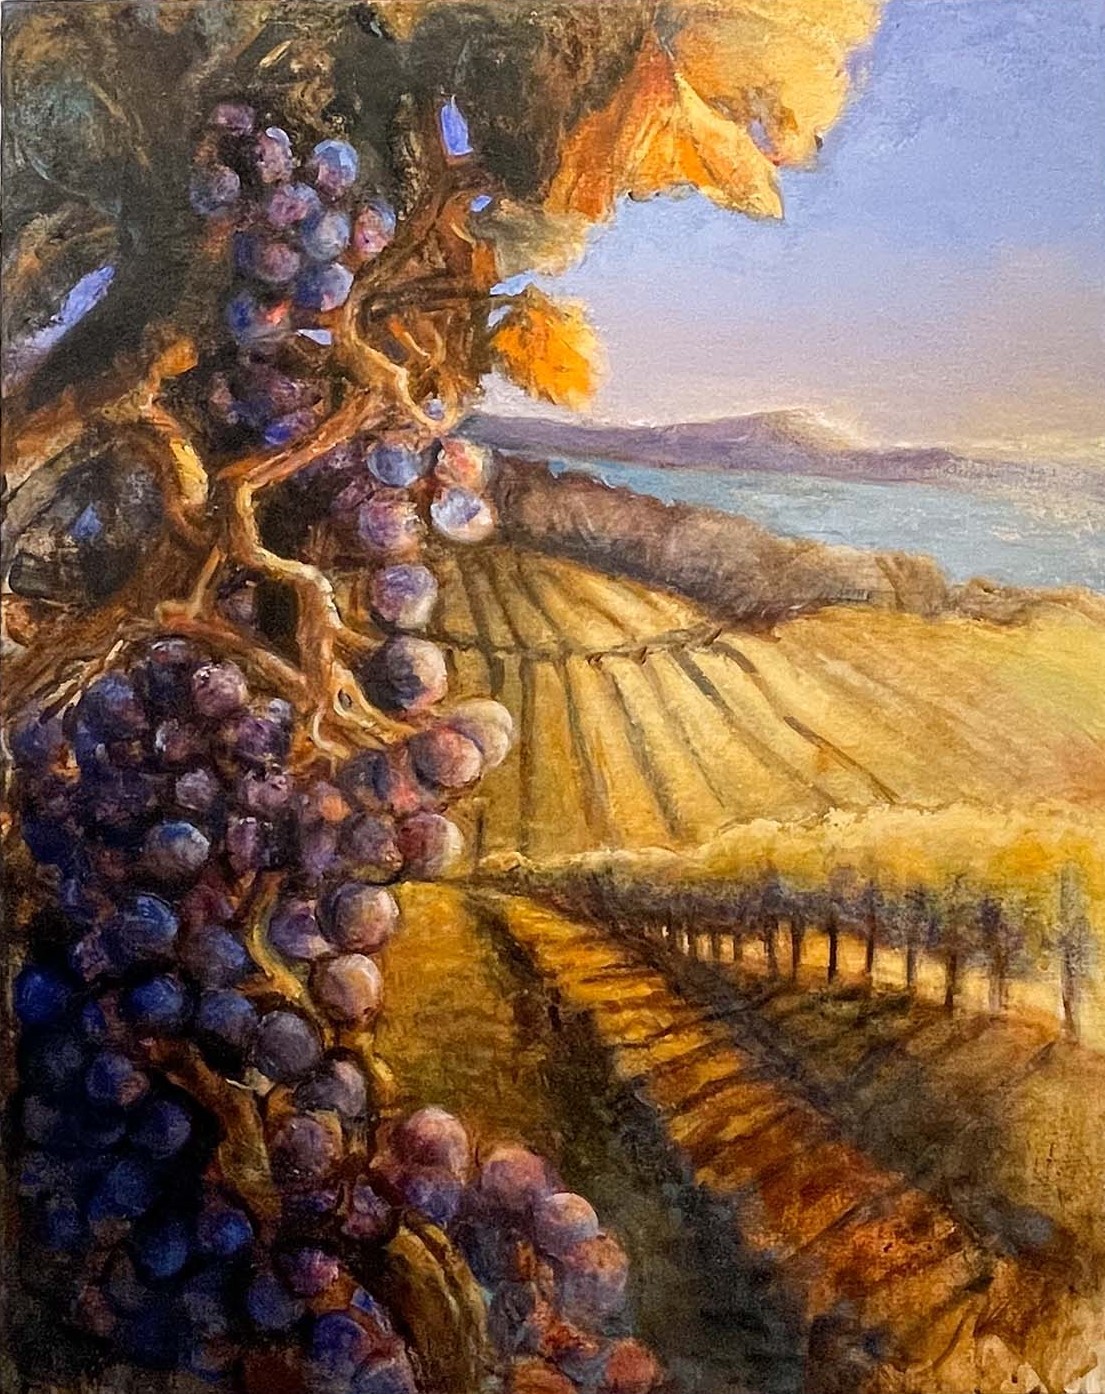 Contemporary art. Title: Vino, Acrylic on Canvas, 30 x 24 inches by Canadian Artist Janice McLean.